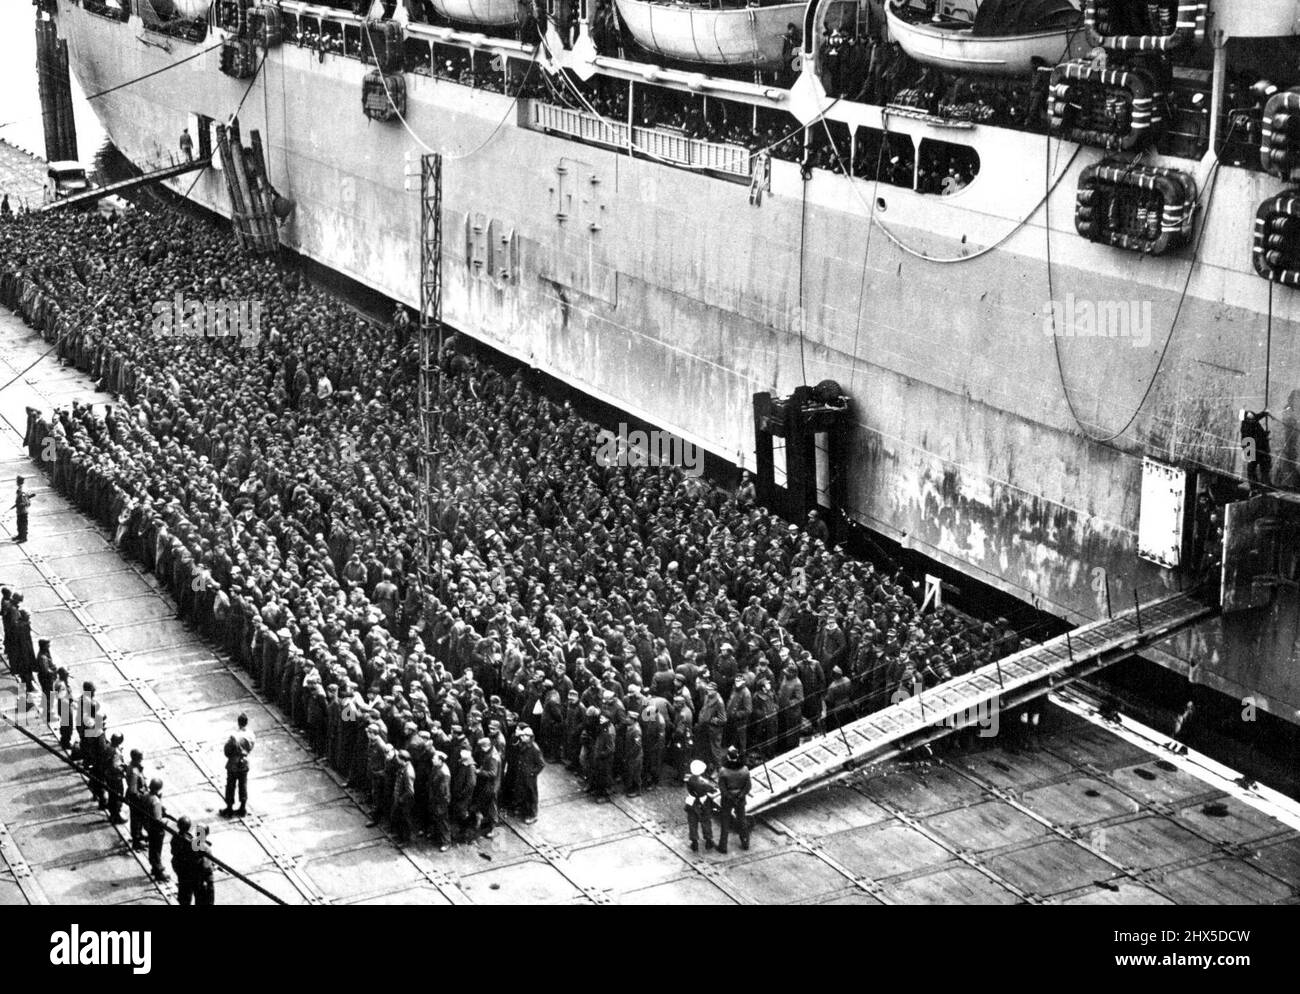 German Prisoners Board Transport for Shipment to U.S. German soldiers stand on the wharves of a French port of embarking waiting to board a troop transport for shipment to prison camps in the U.S. Allied armies in western Europe took 2,472,906 German prisoners between June 6, 1944, the day of the Normandy landings, and April 27, 1945. On April 1, 1945, German prisoners numbering 311,630 were in U.S. camps. The U.S. War Department adheres strickly to the Geneva Convention in its treatment of prisoners of war. June 4, 1945. (Photo by U.S. Office of War Information Picture). Stock Photo